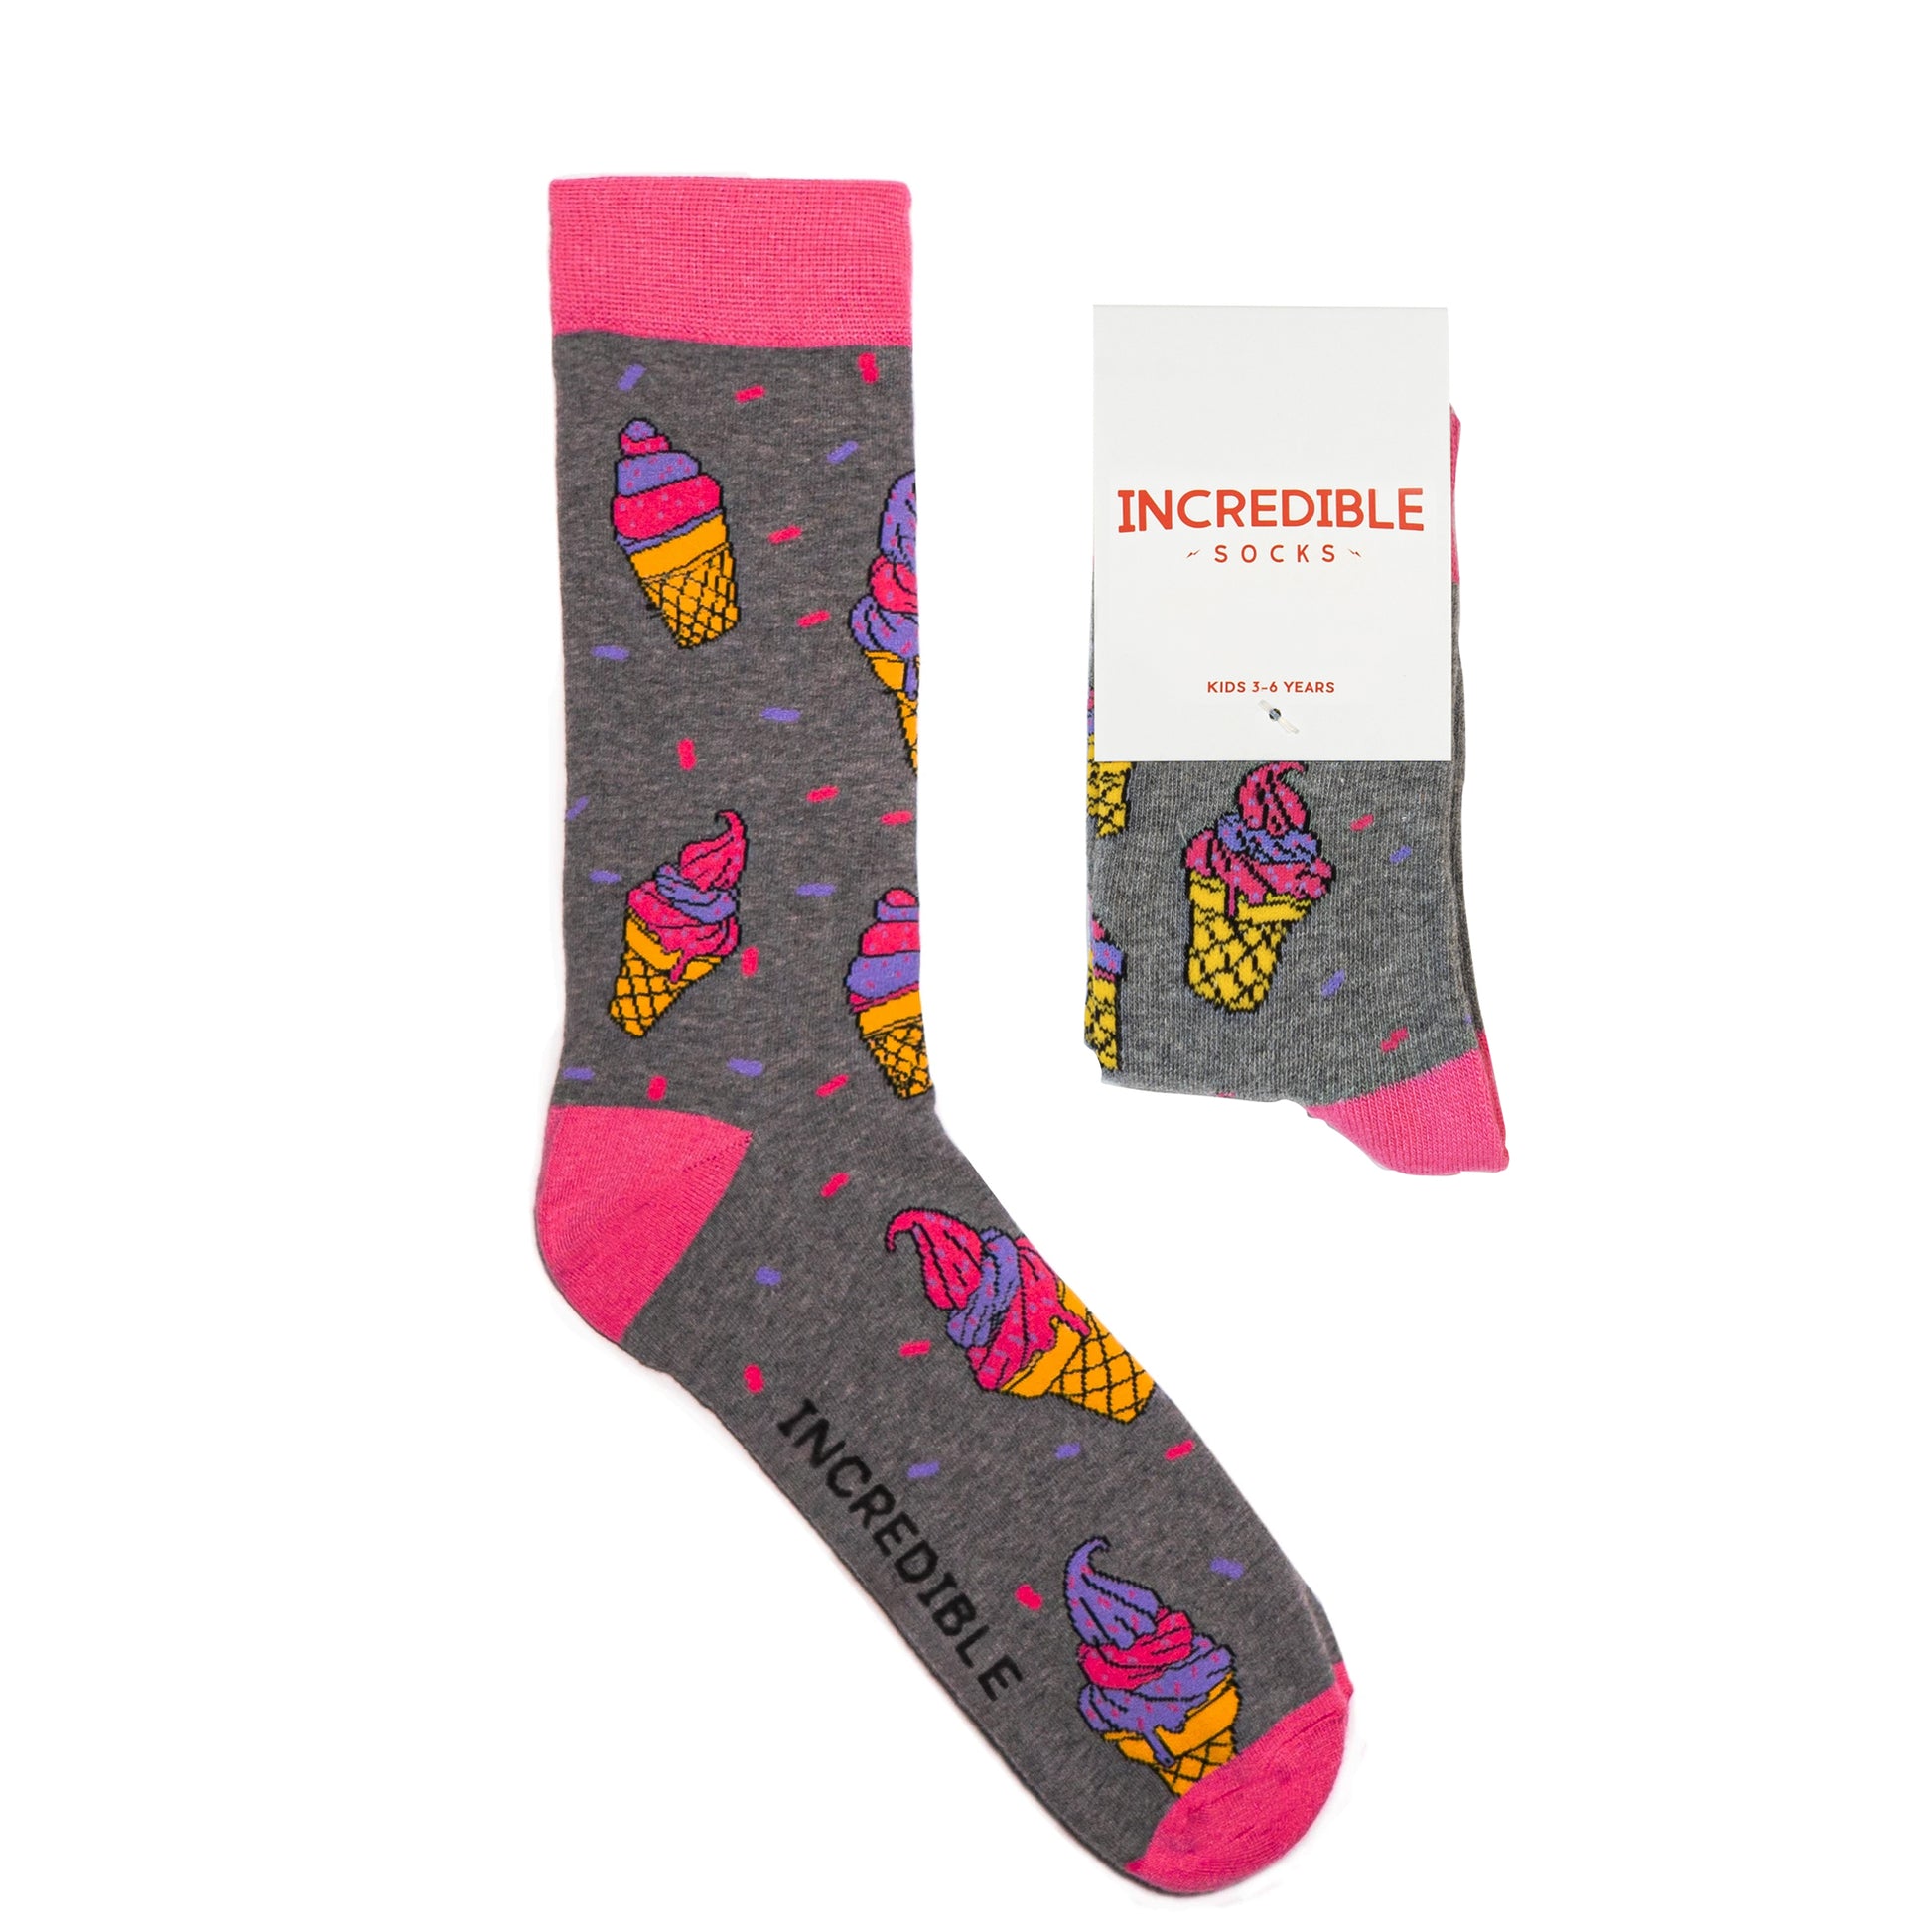 Kids and Adults socks with colorful ice cream. Made from sustainable bamboo.